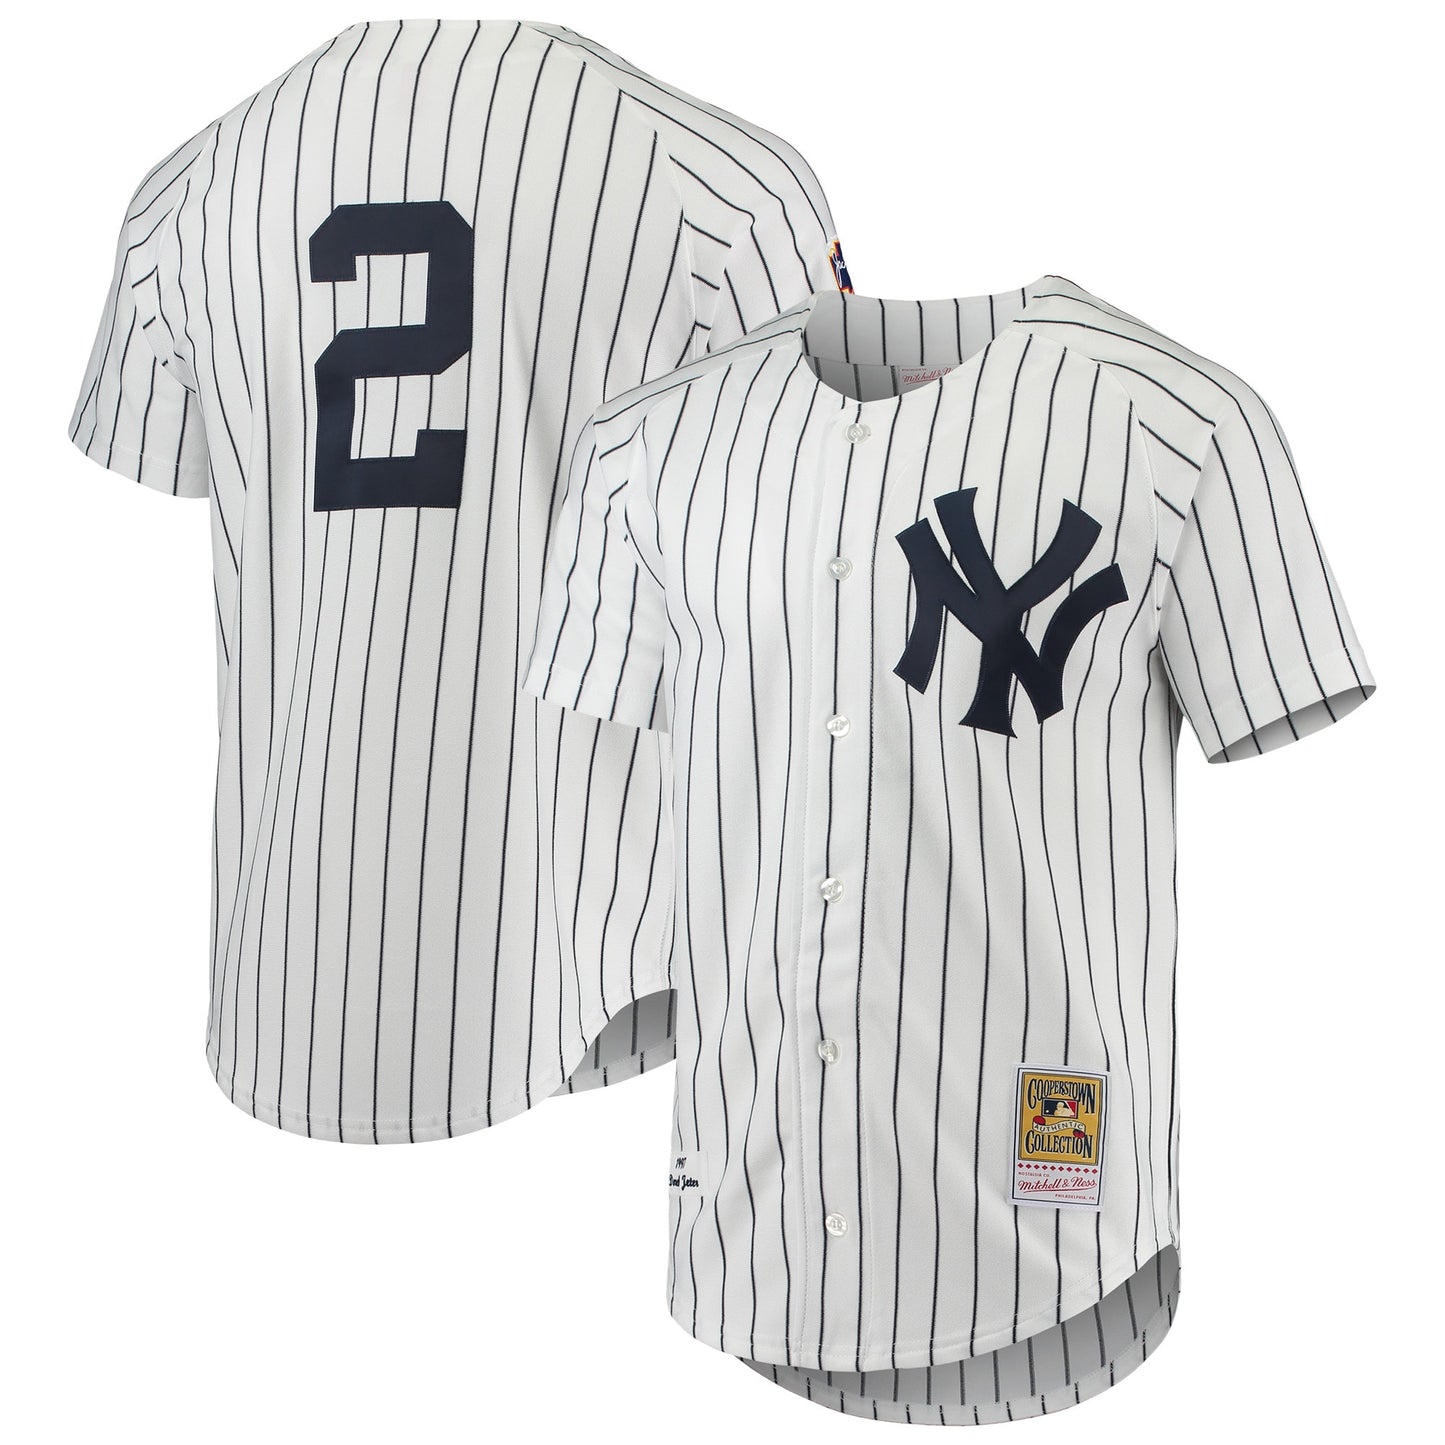 Derek Jeter New York Yankees Mitchell & Ness 1997 Cooperstown Collection Authentic Jersey - White